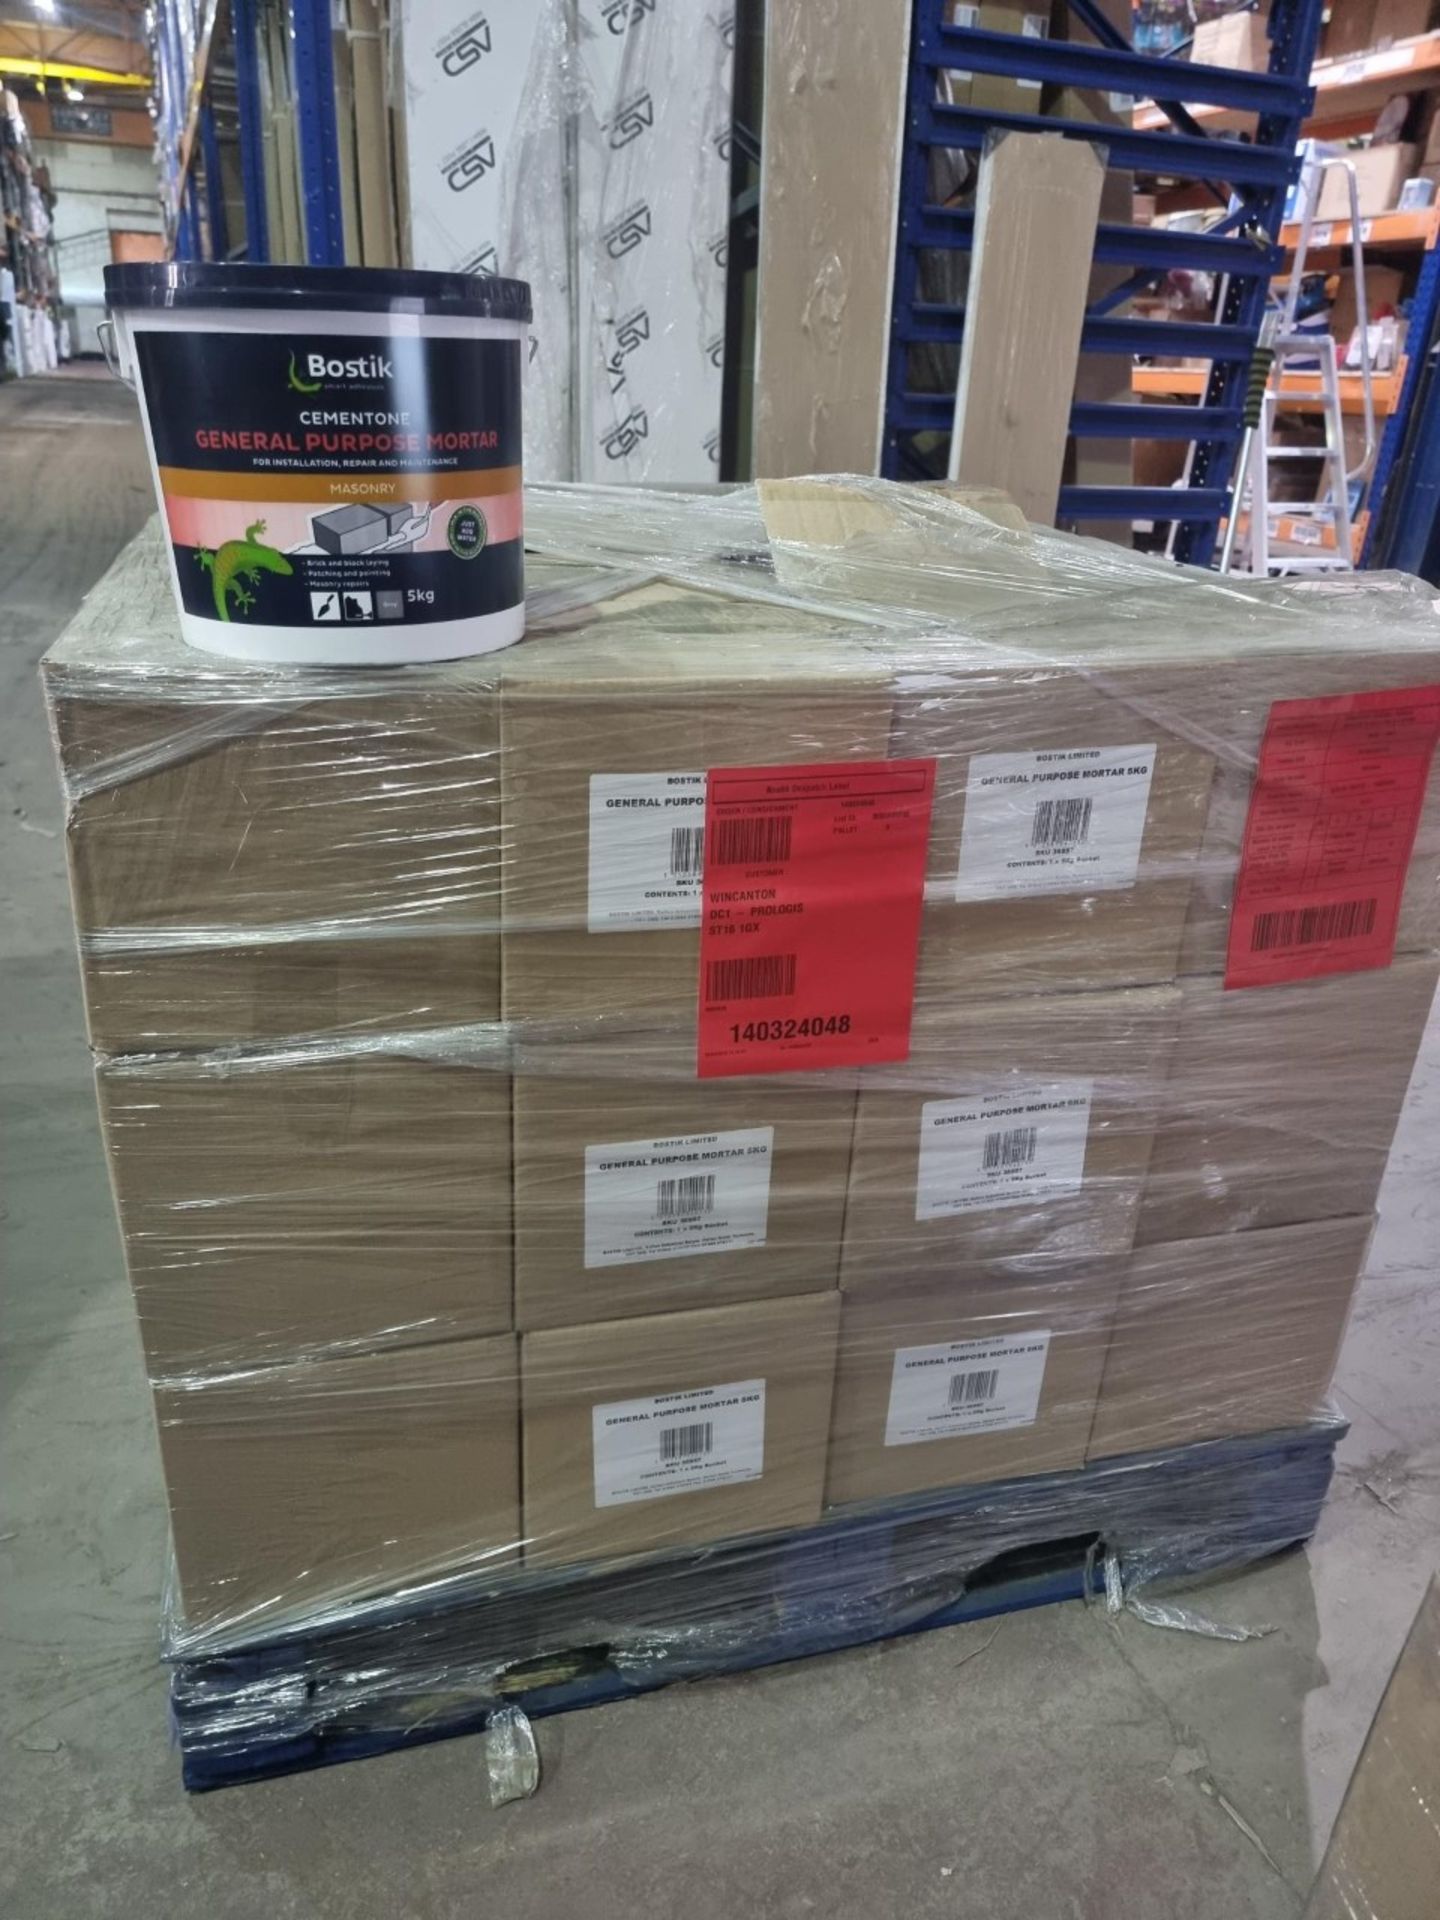 (B138) PALLET TO CONTAIN 50 x 5KG TUBS OF BOSTIK CEMENTONE GENERAL PURPOSE MORTAR - Image 2 of 2